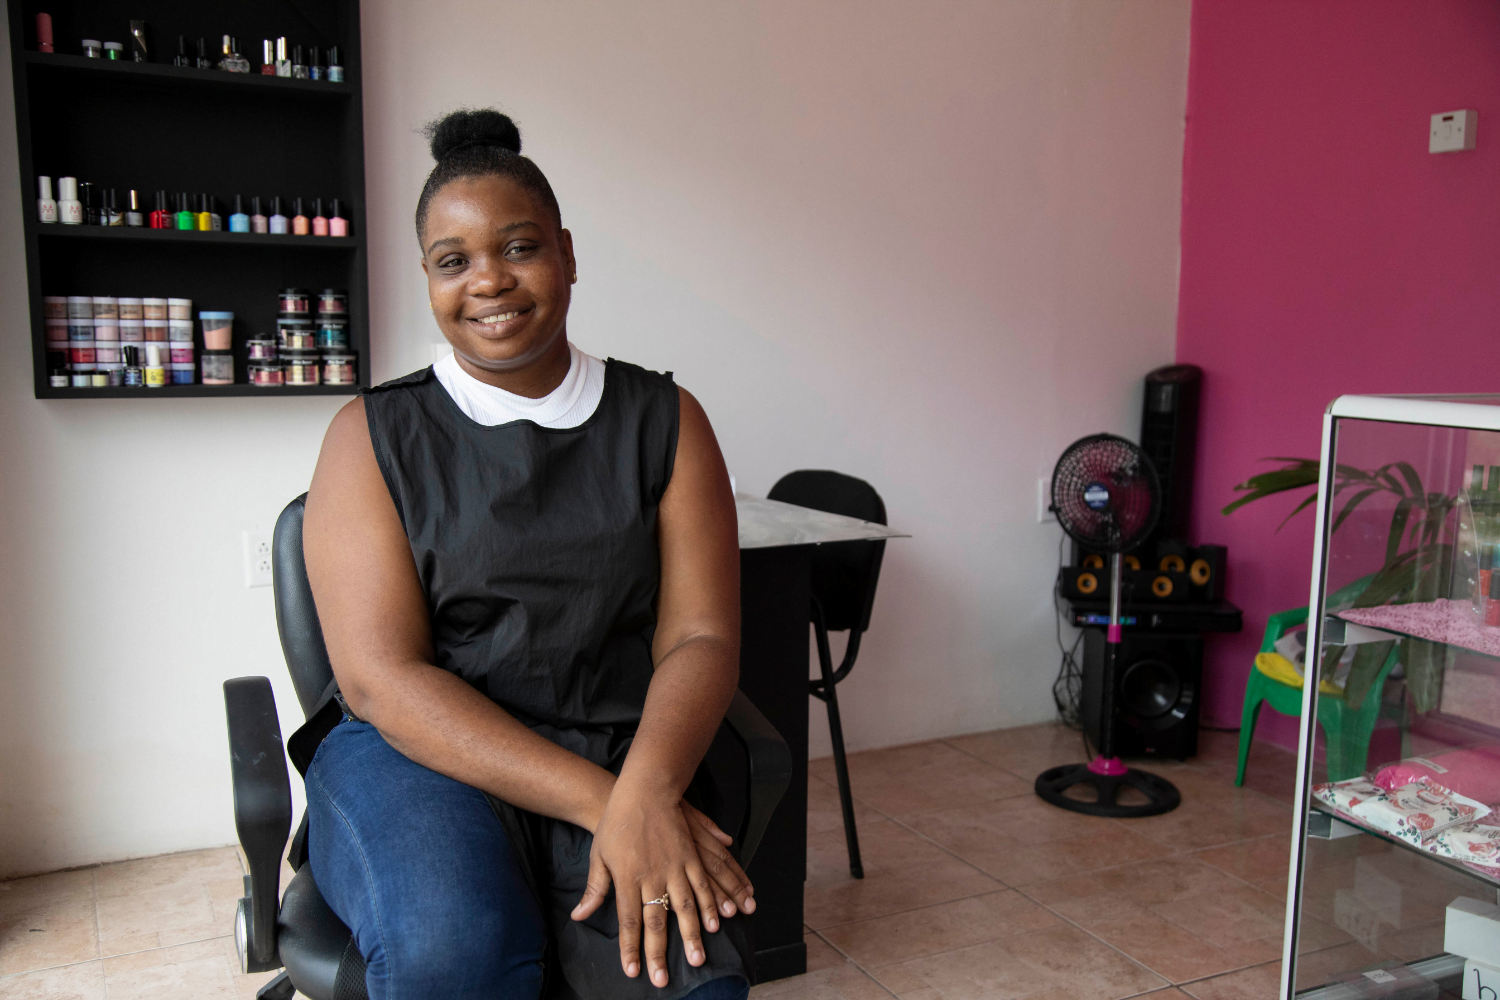 Akela Henry, a woman entrepreneur from Guyana, sits in a black smock with a white sleeveless shirt underneath in a beauty shop. She is in front of a nail station and there is a glass case nearby with many colourful nail polishes in it. In the background there is a white wall with more nail polishes on display and a pink wall. Her hair is in a bun and she is smiling.